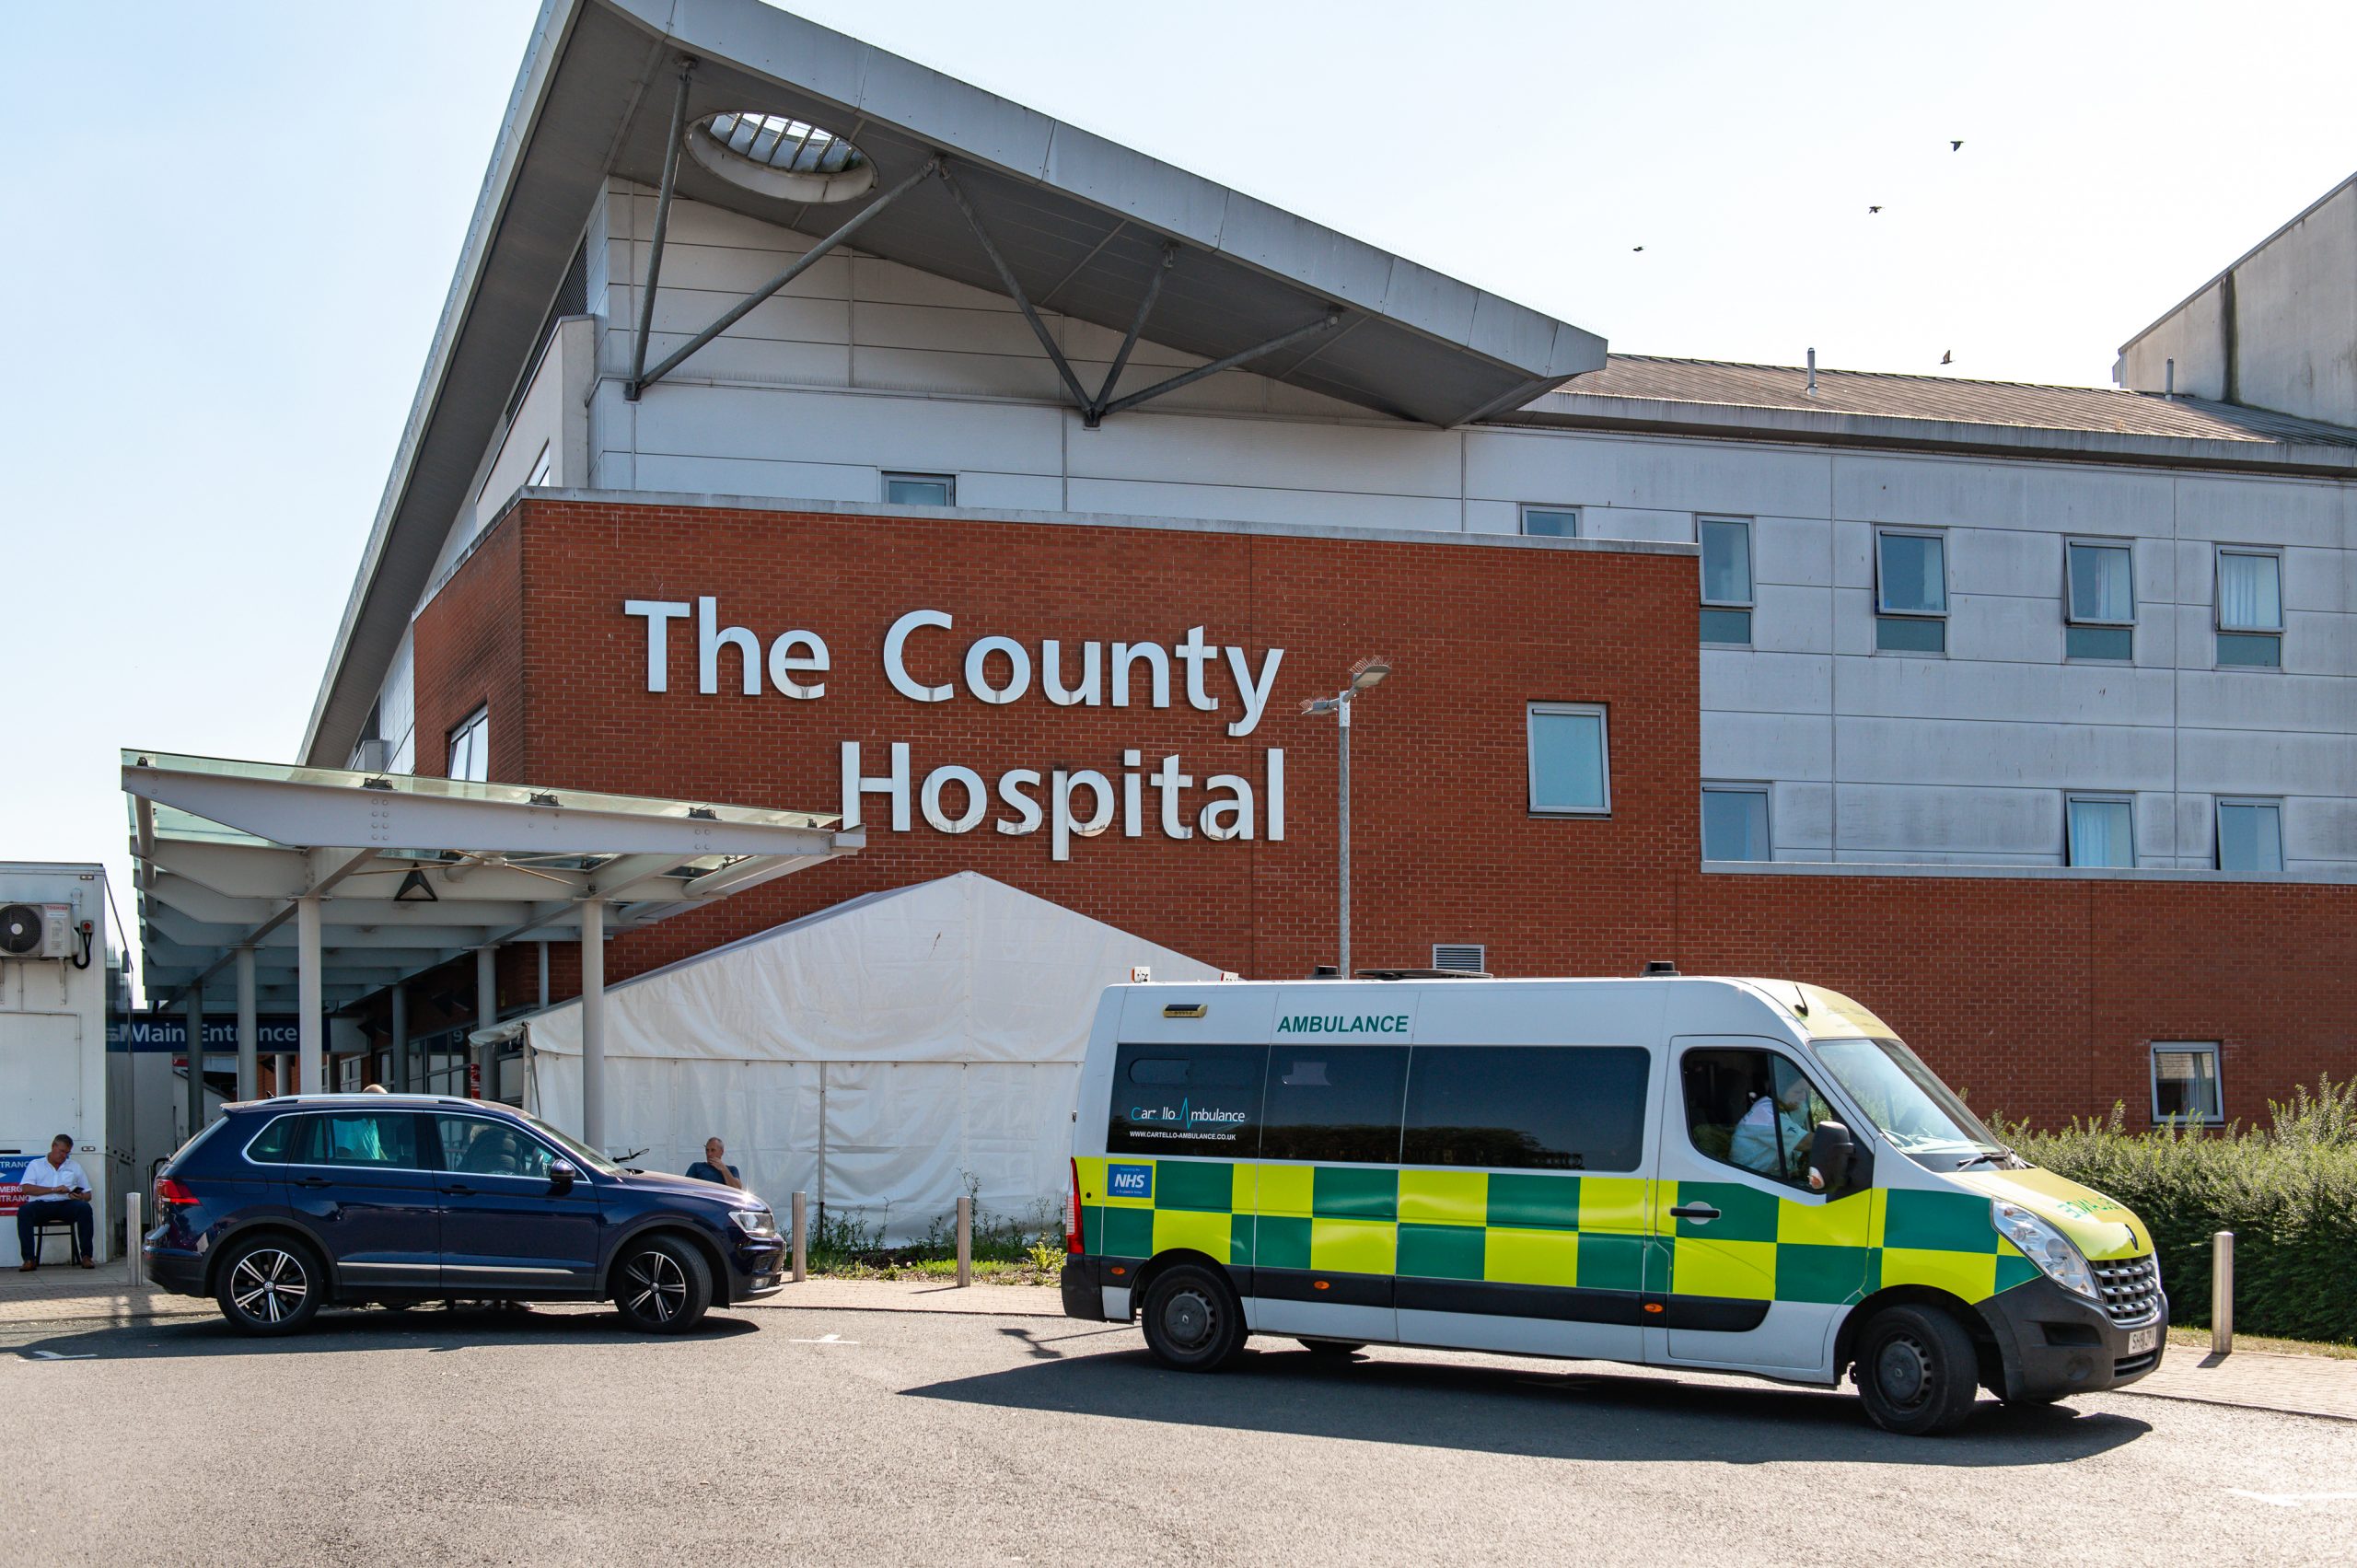 NEWS | The number of patients with COVID-19 at hospital in Herefordshire remains the same as last week